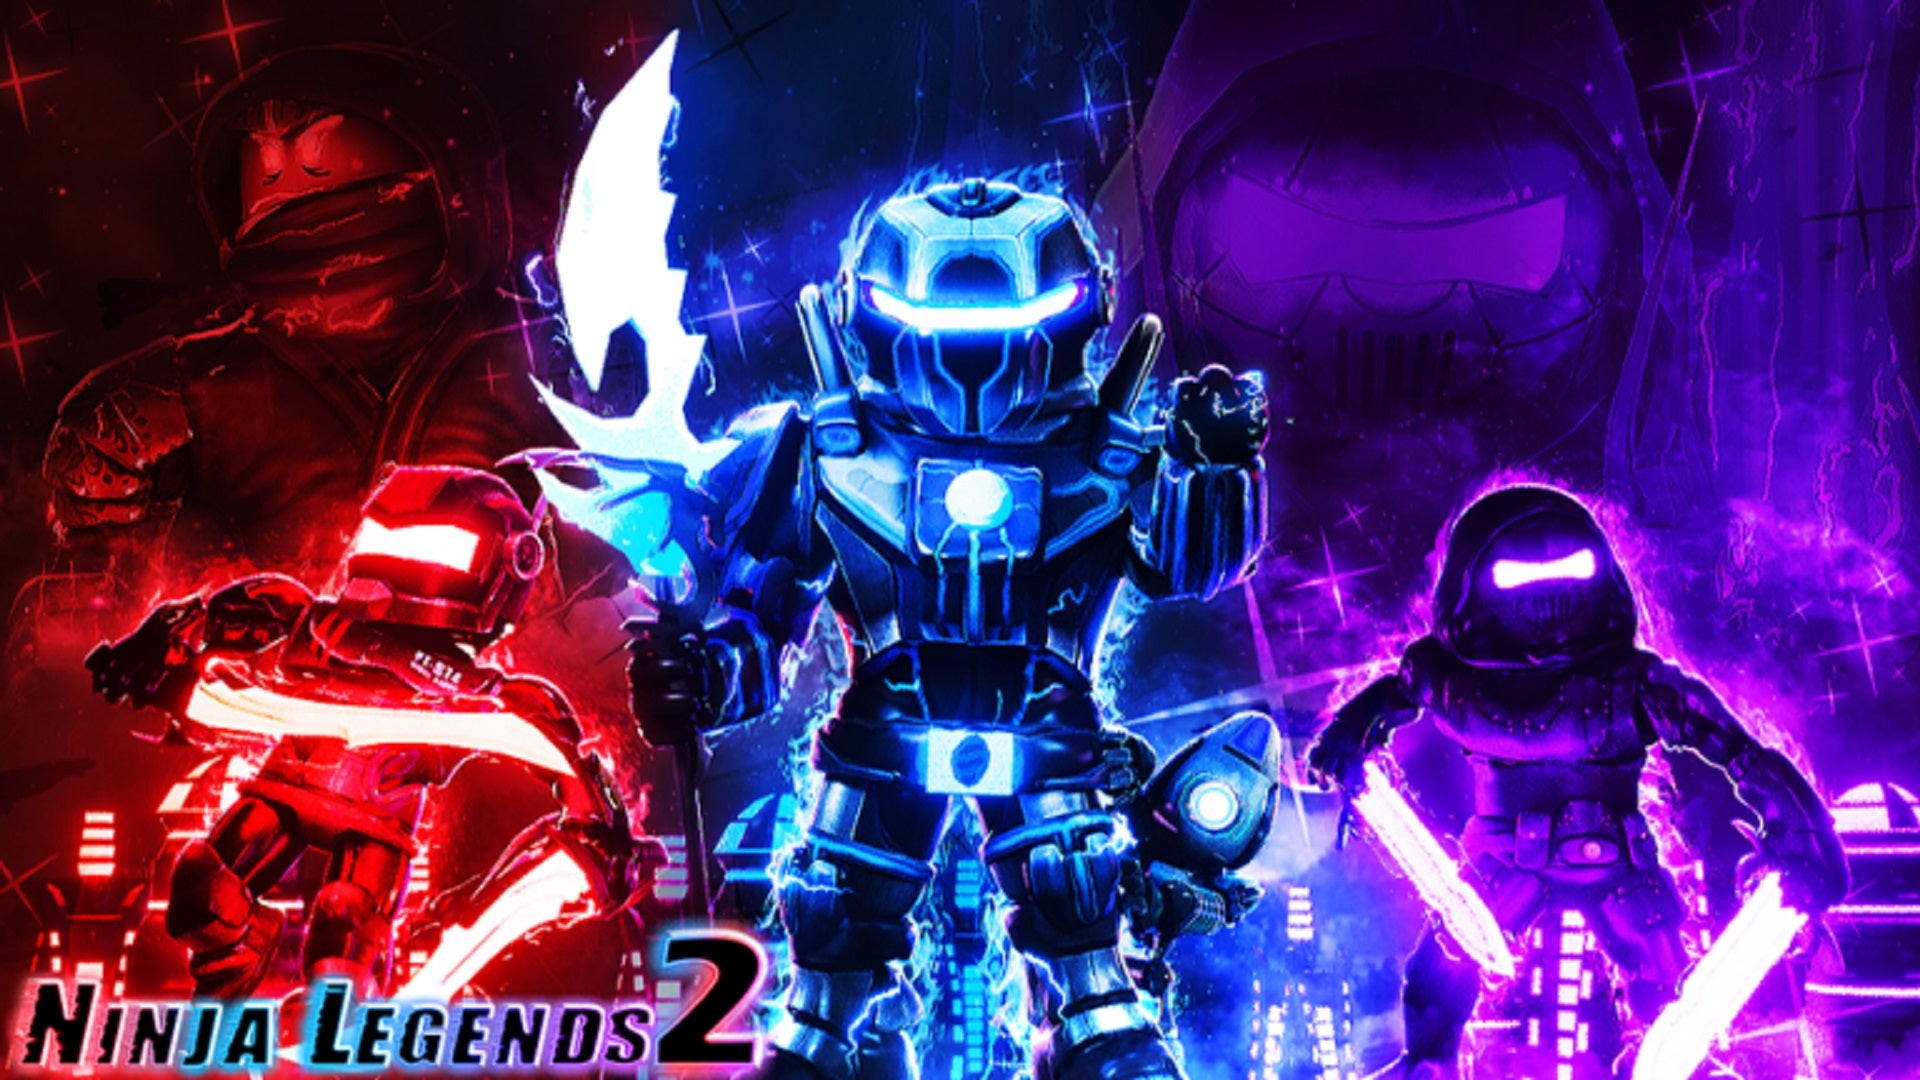 Three Roblox ninja mechs against a red, blue, and pinkish-purple background.